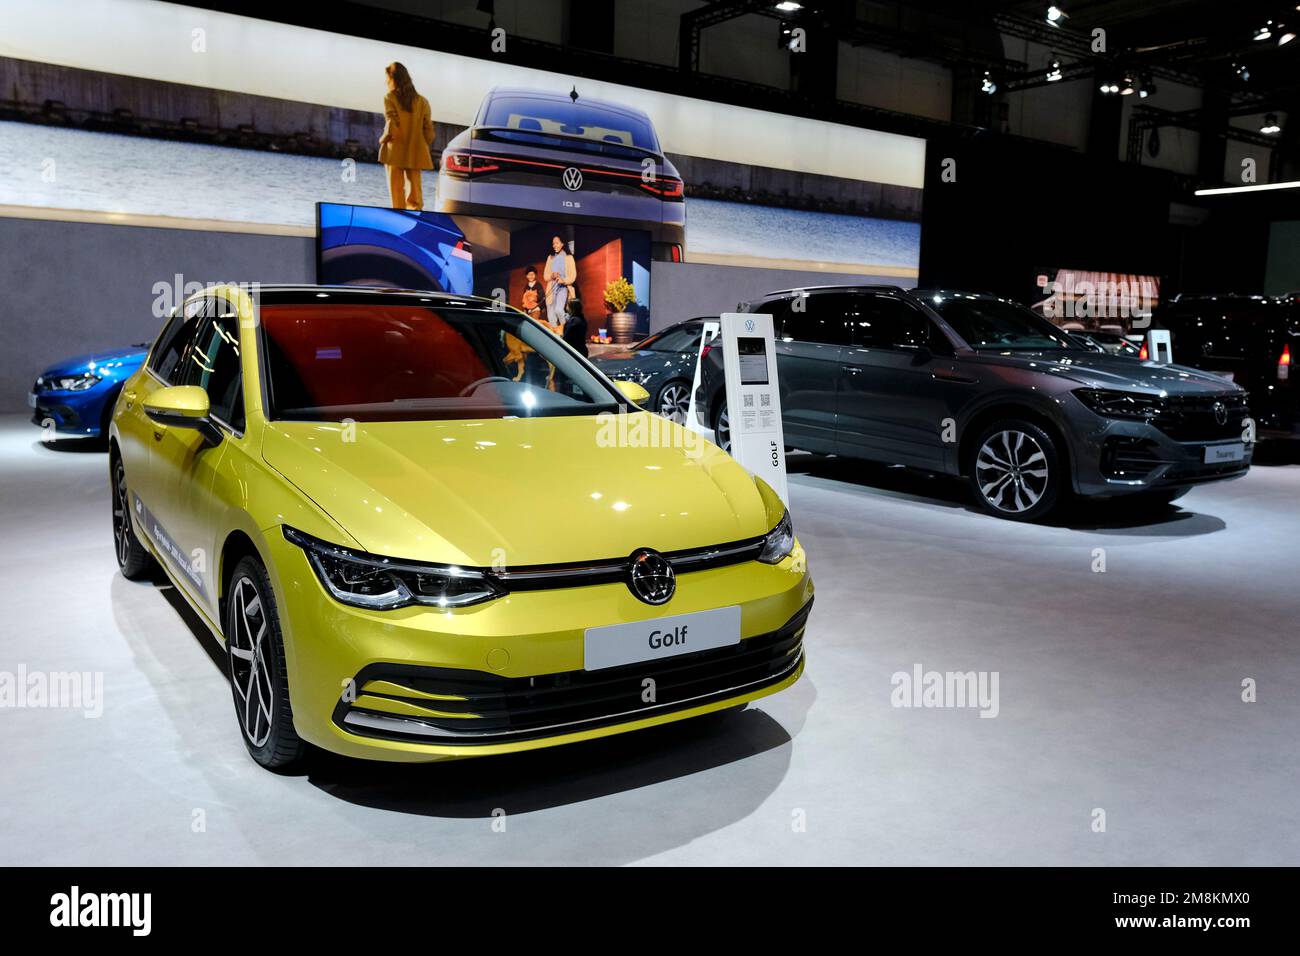 Brussels, Belgium. 13th Jan, 2023. Volkswagen car on display during the opening of the Brussels Motor Show at the Expo in Brussels, Belgium on Jan. 13, 2023. Credit: ALEXANDROS MICHAILIDIS/Alamy Live News Stock Photo